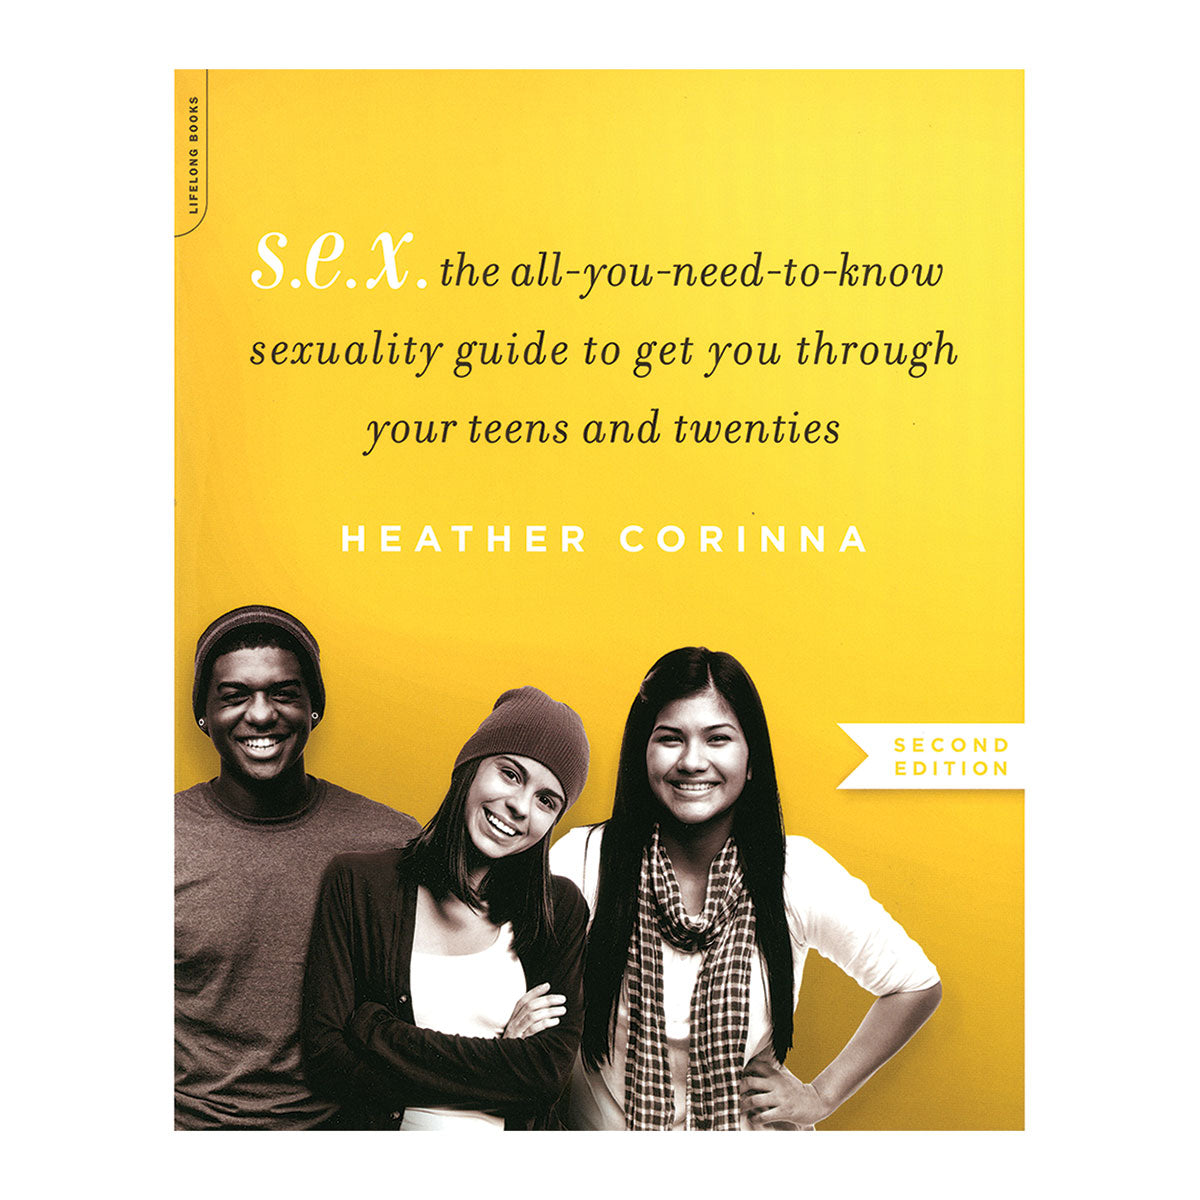 S.E.X.: The All-You-Need-to-Know Sexuality Guide to Get You Through Your Teens and Twenties - Second Edition - Da Capo Press